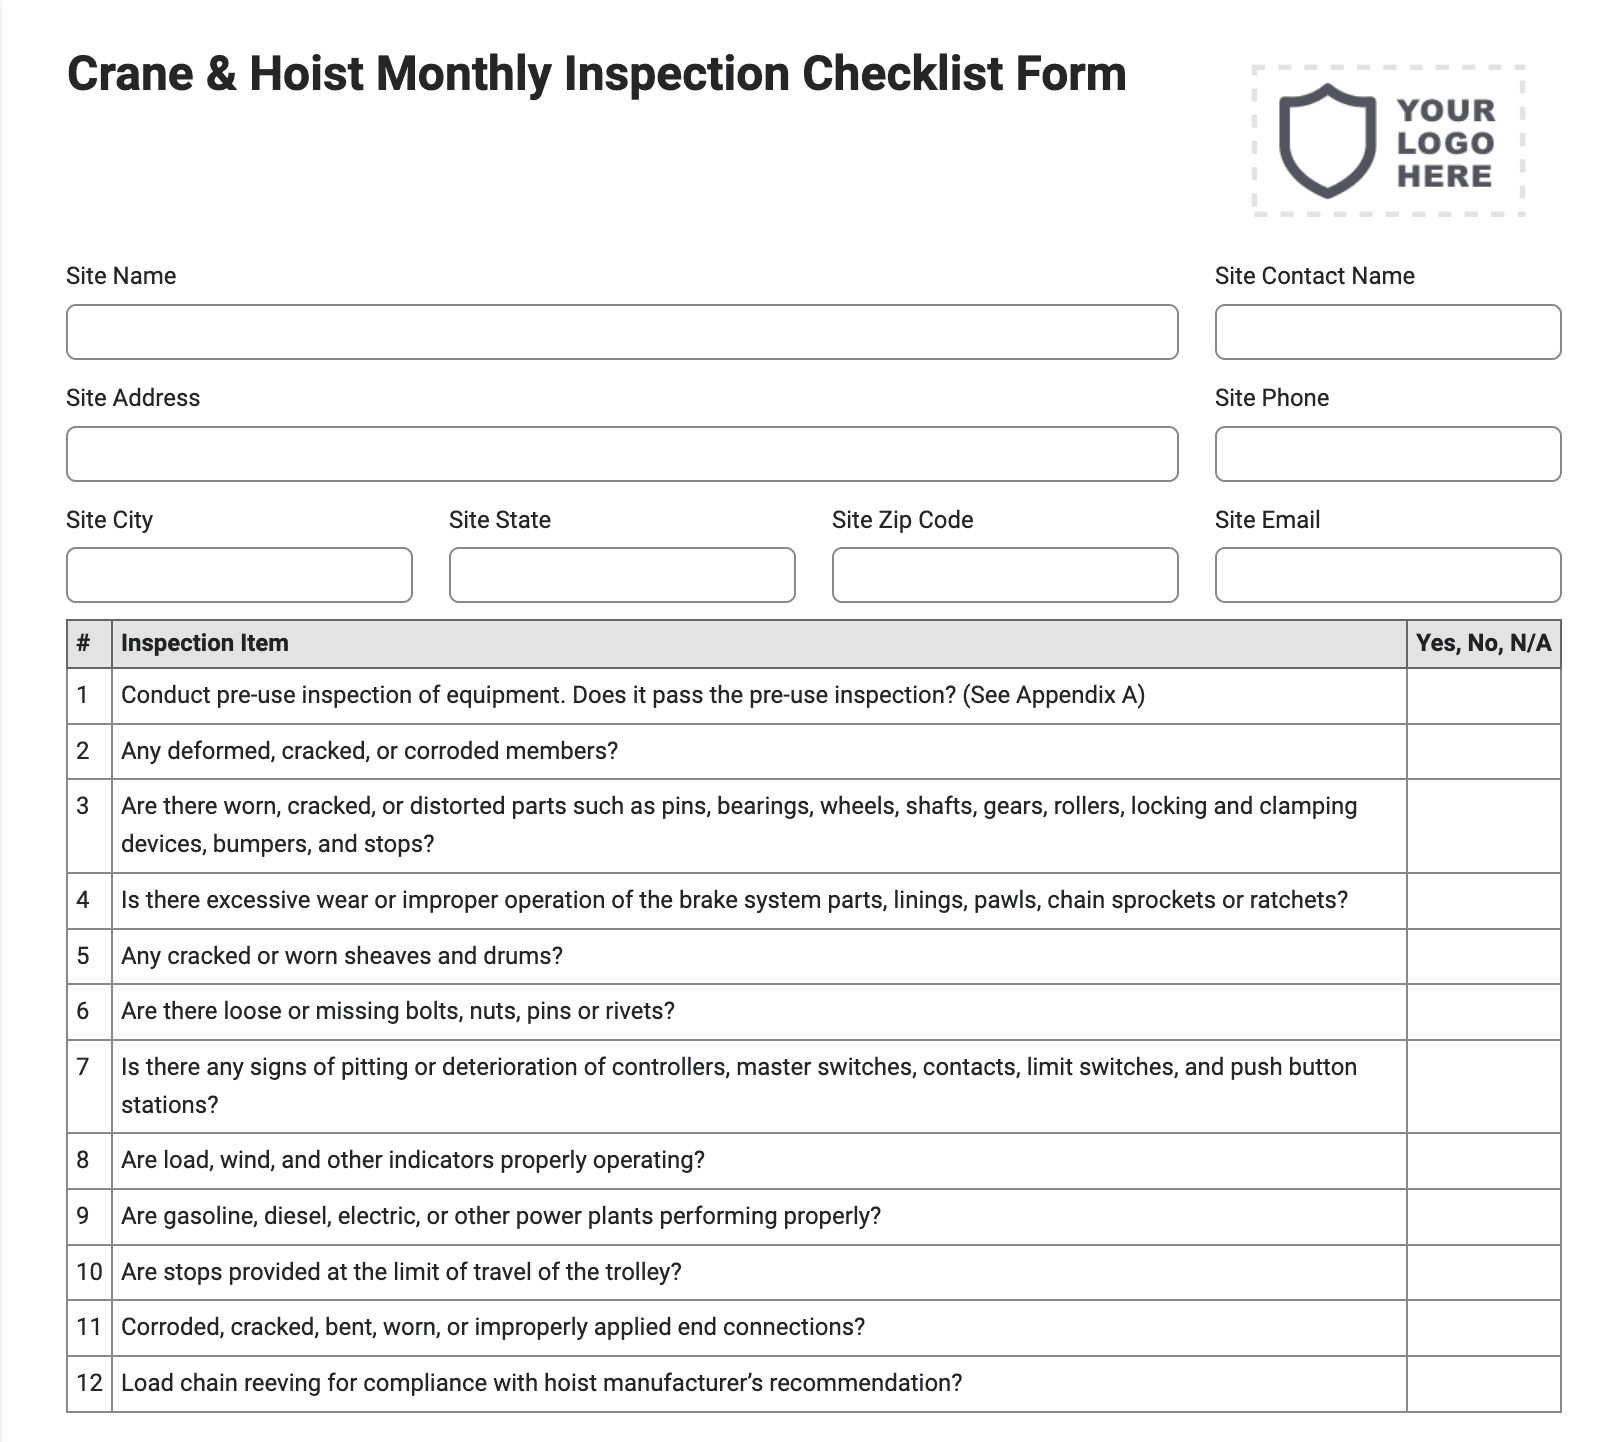 Crane and Hoist Monthly Inspection Checklist Form